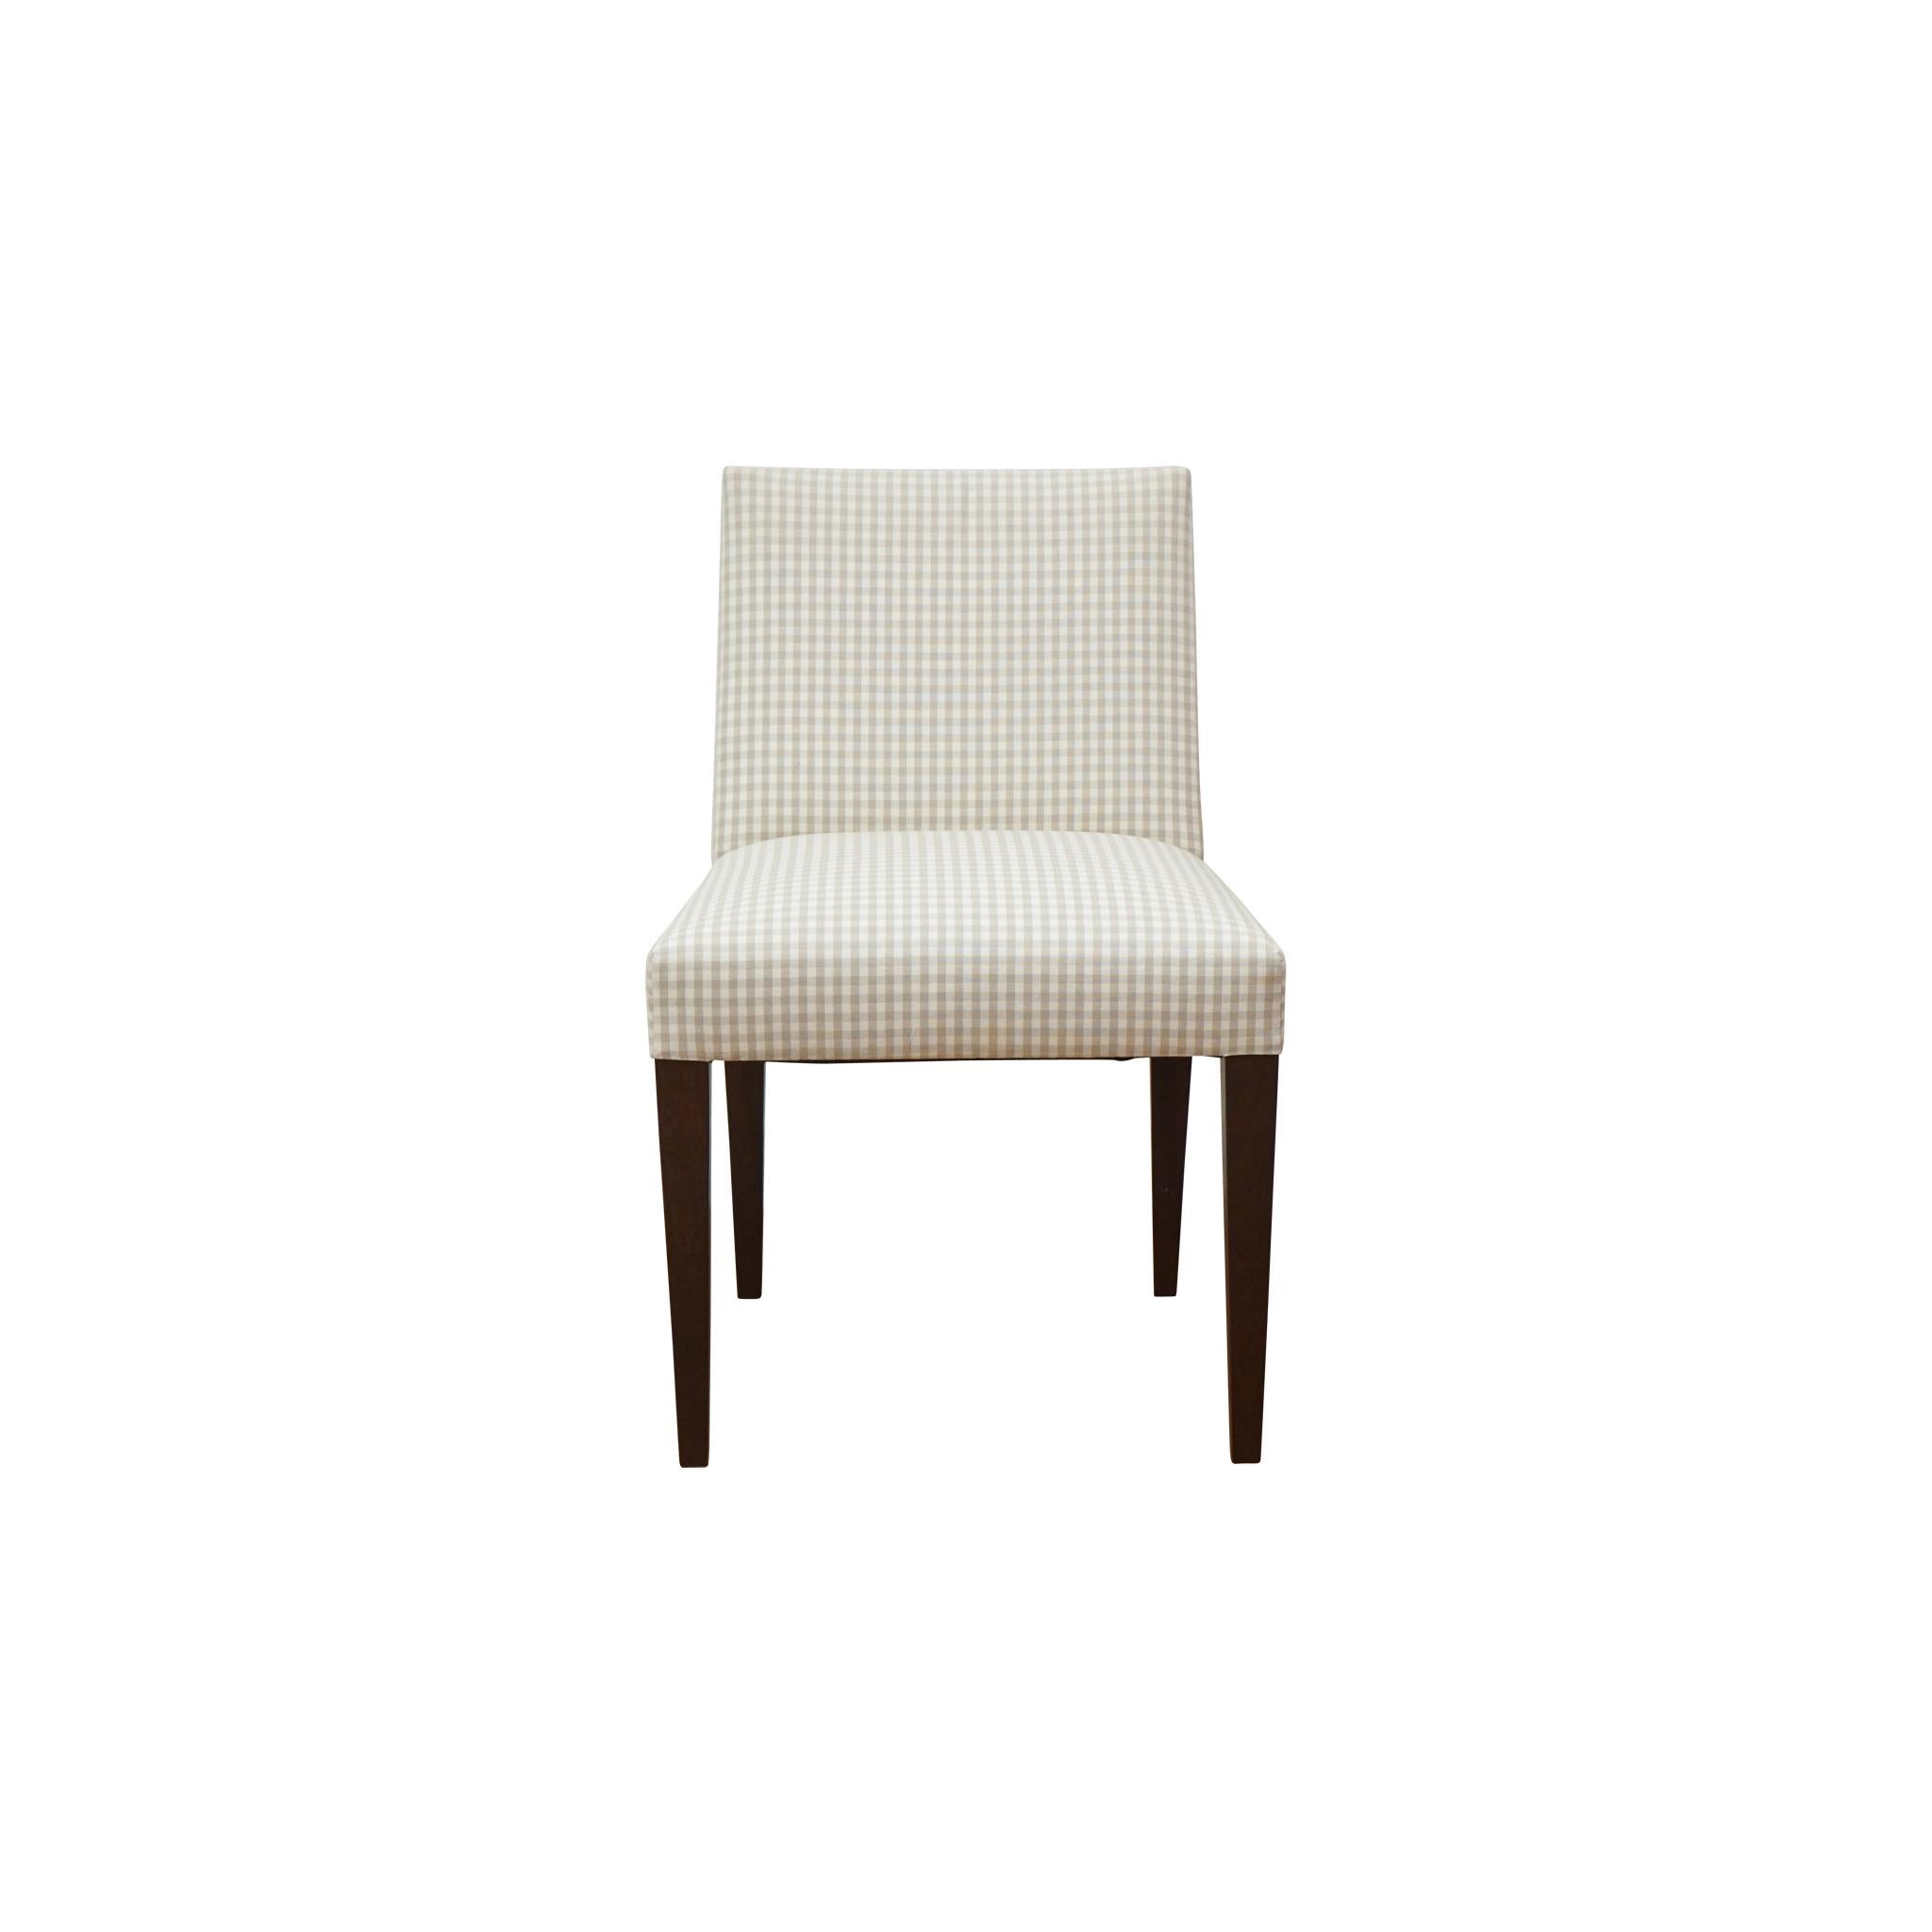 Drawing inspiration from a classic 1950s Dunbar design, this Kirby dining side chair is from the foley&cox HOME Collection of custom furniture. Featuring elegantly tapered legs with tight seat and back upholstery, the chair is available in choice of